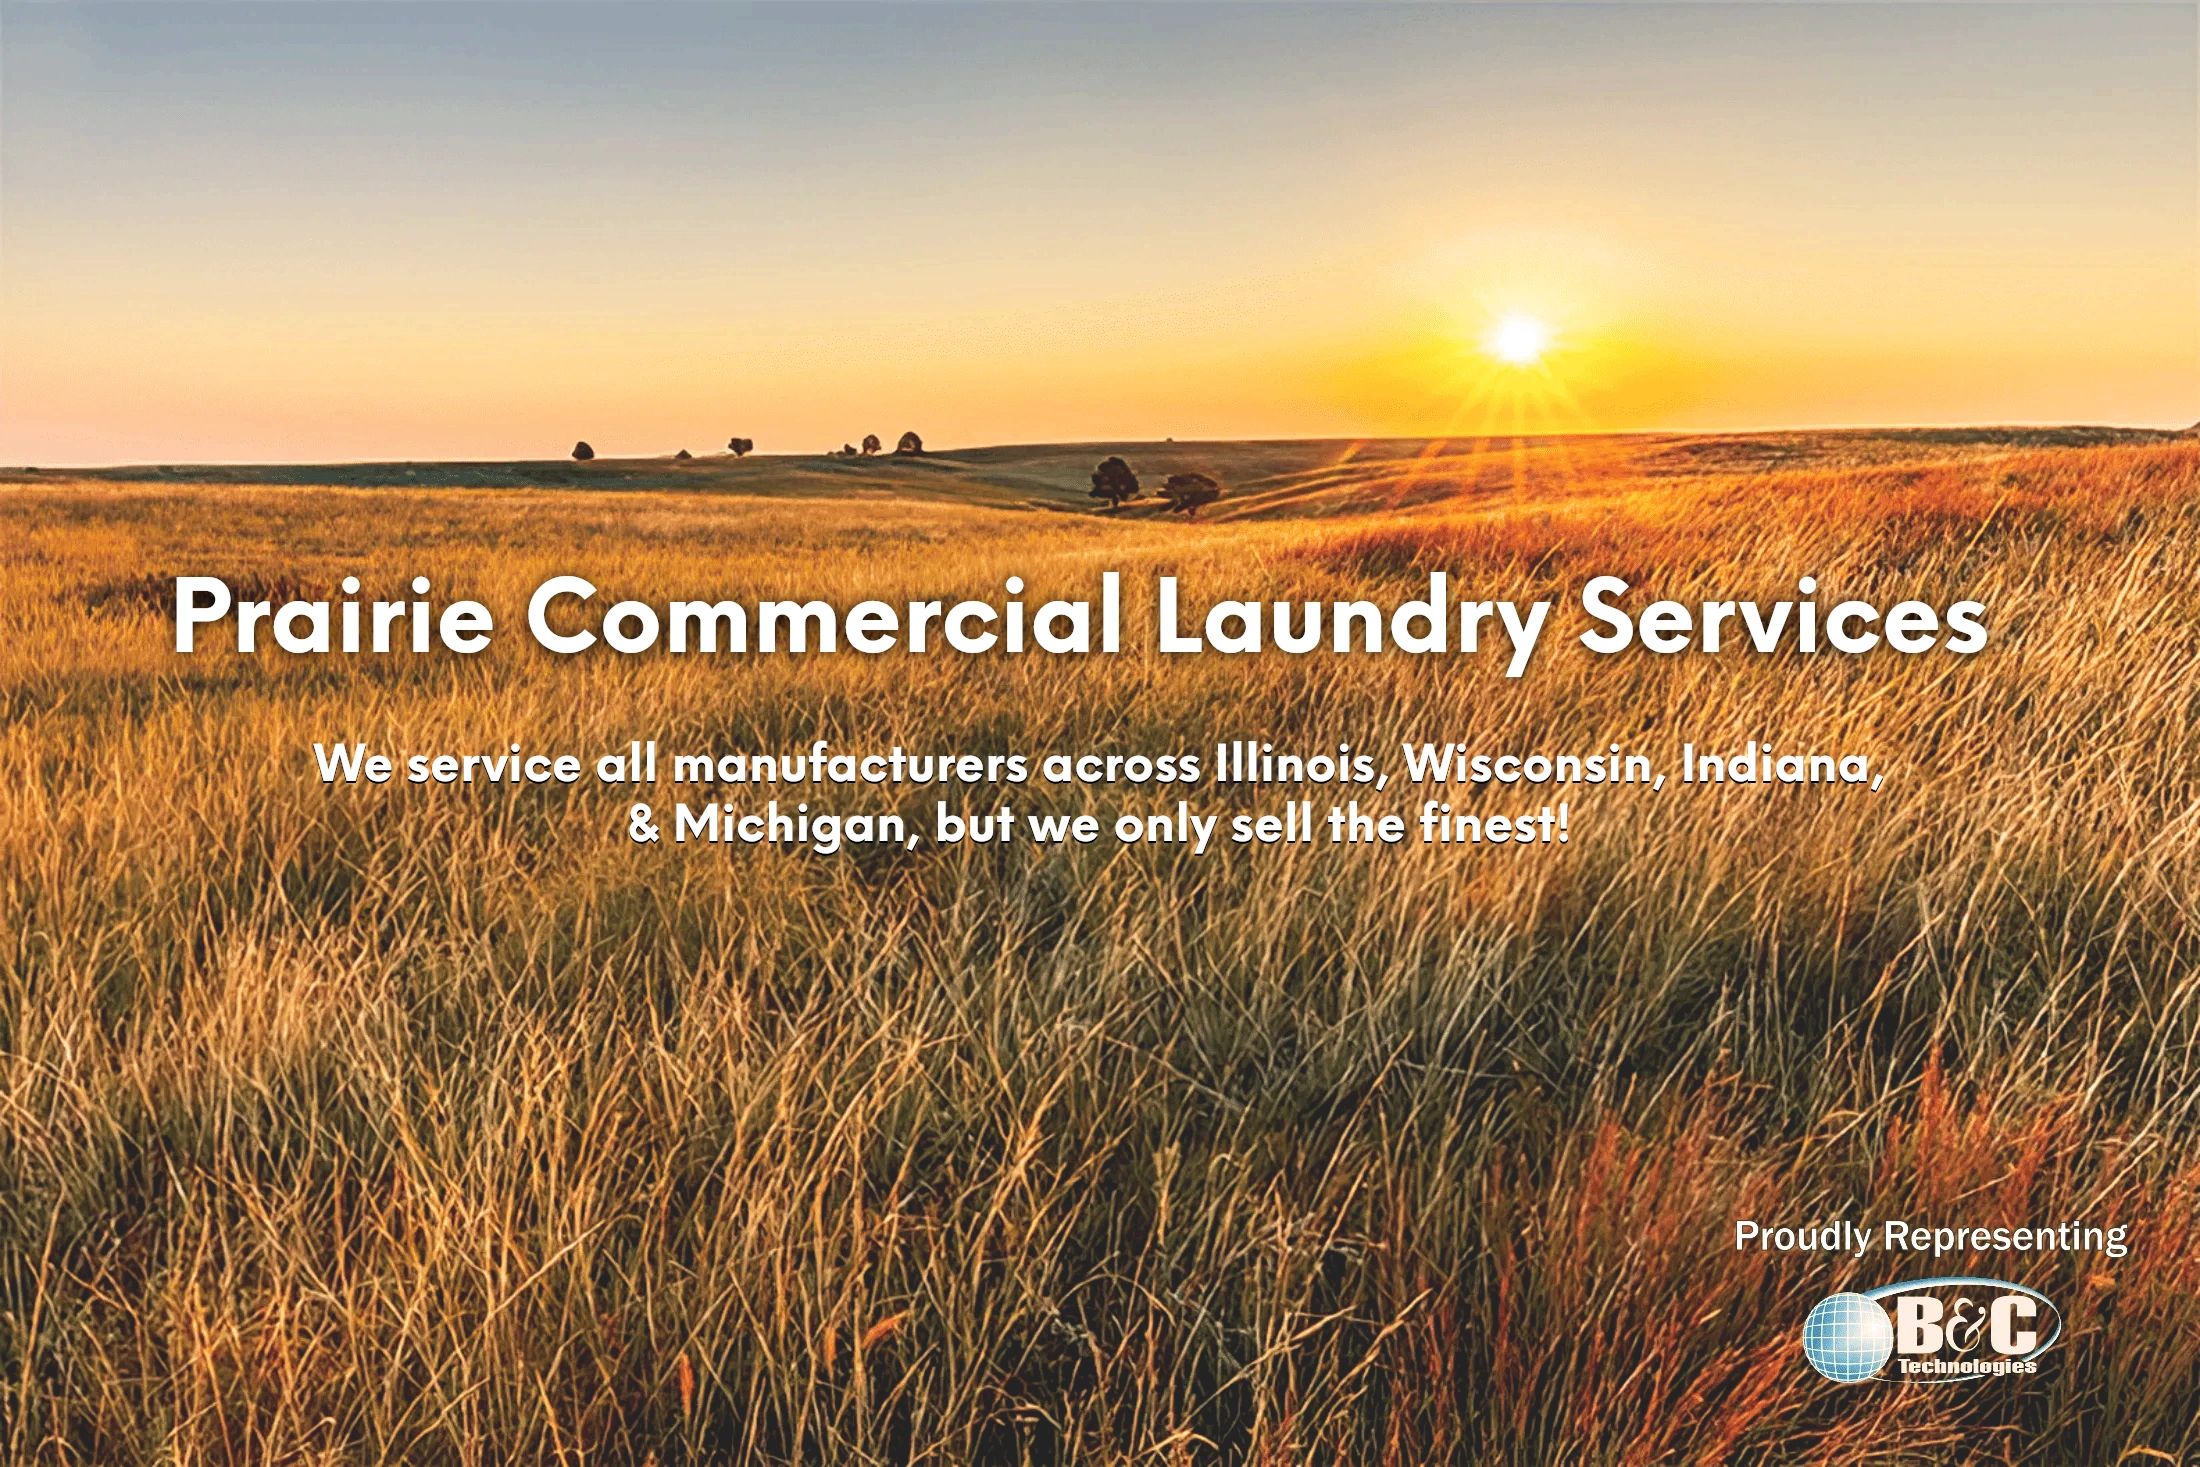 Prairie Commercial Laundry:  We service all machines across Illinois, Wisconsin, Indiana, & Michigan